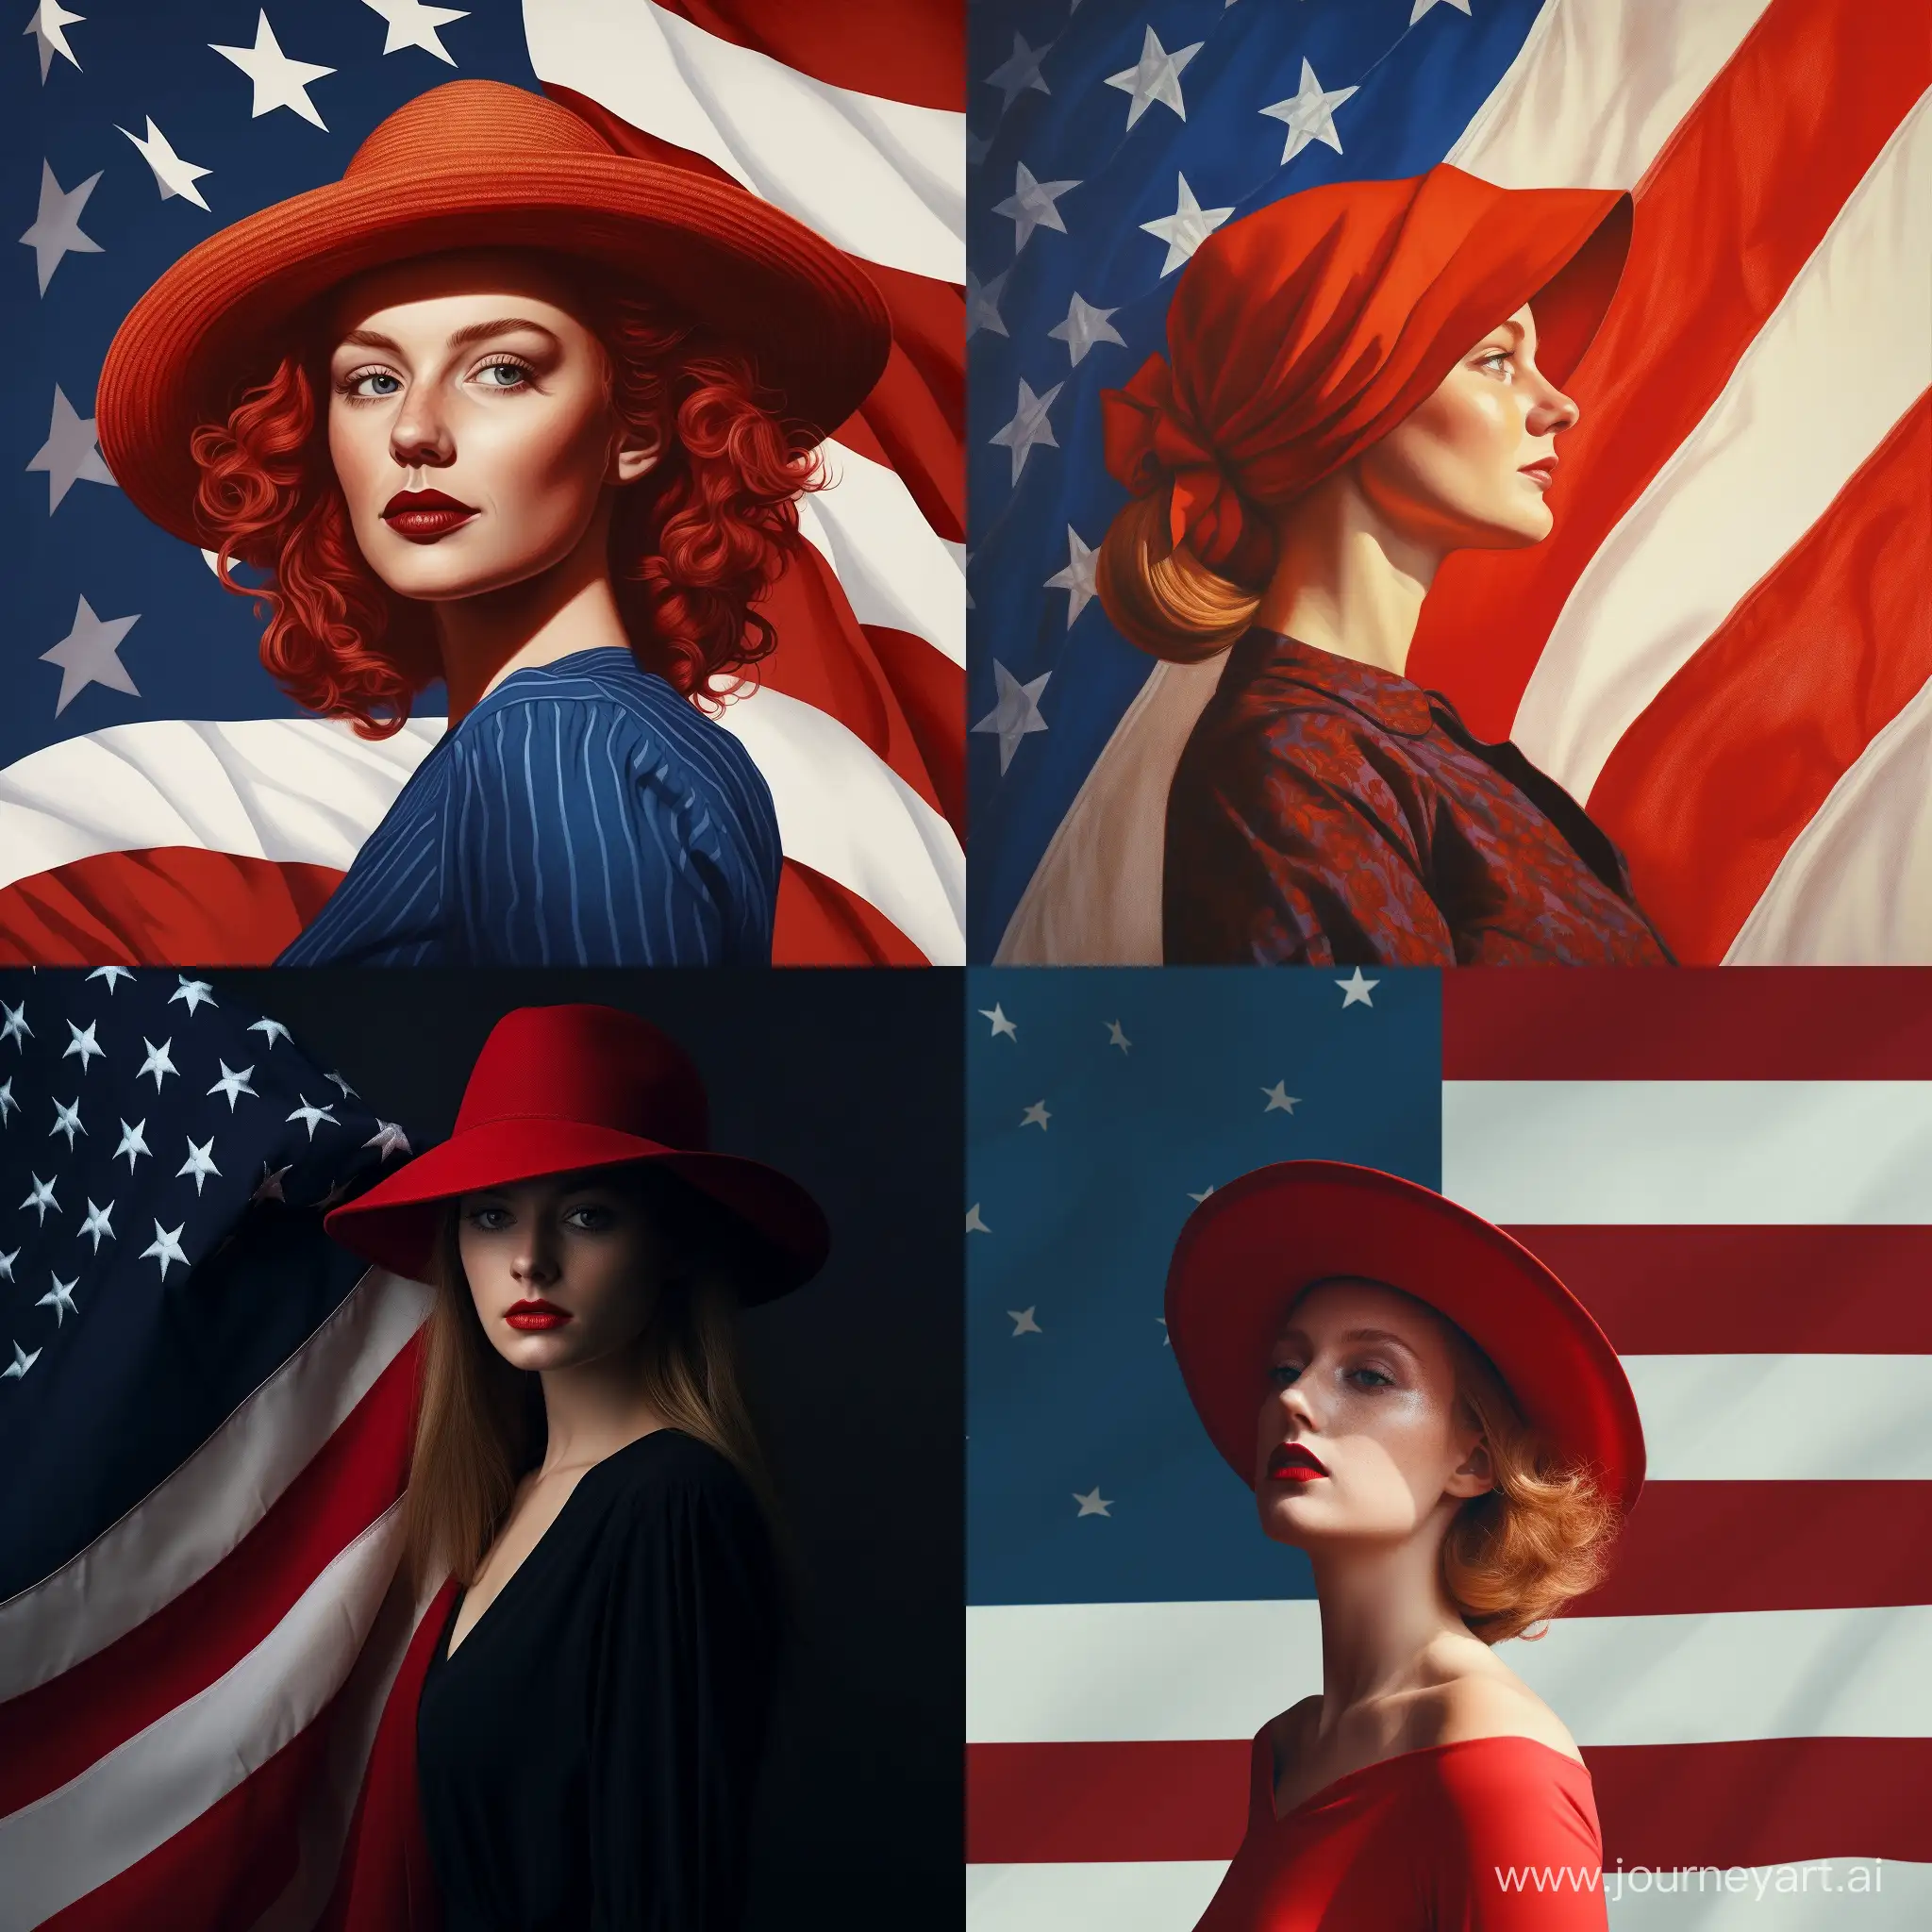 woman with red hat symbolizing chavism carrying a USA flag